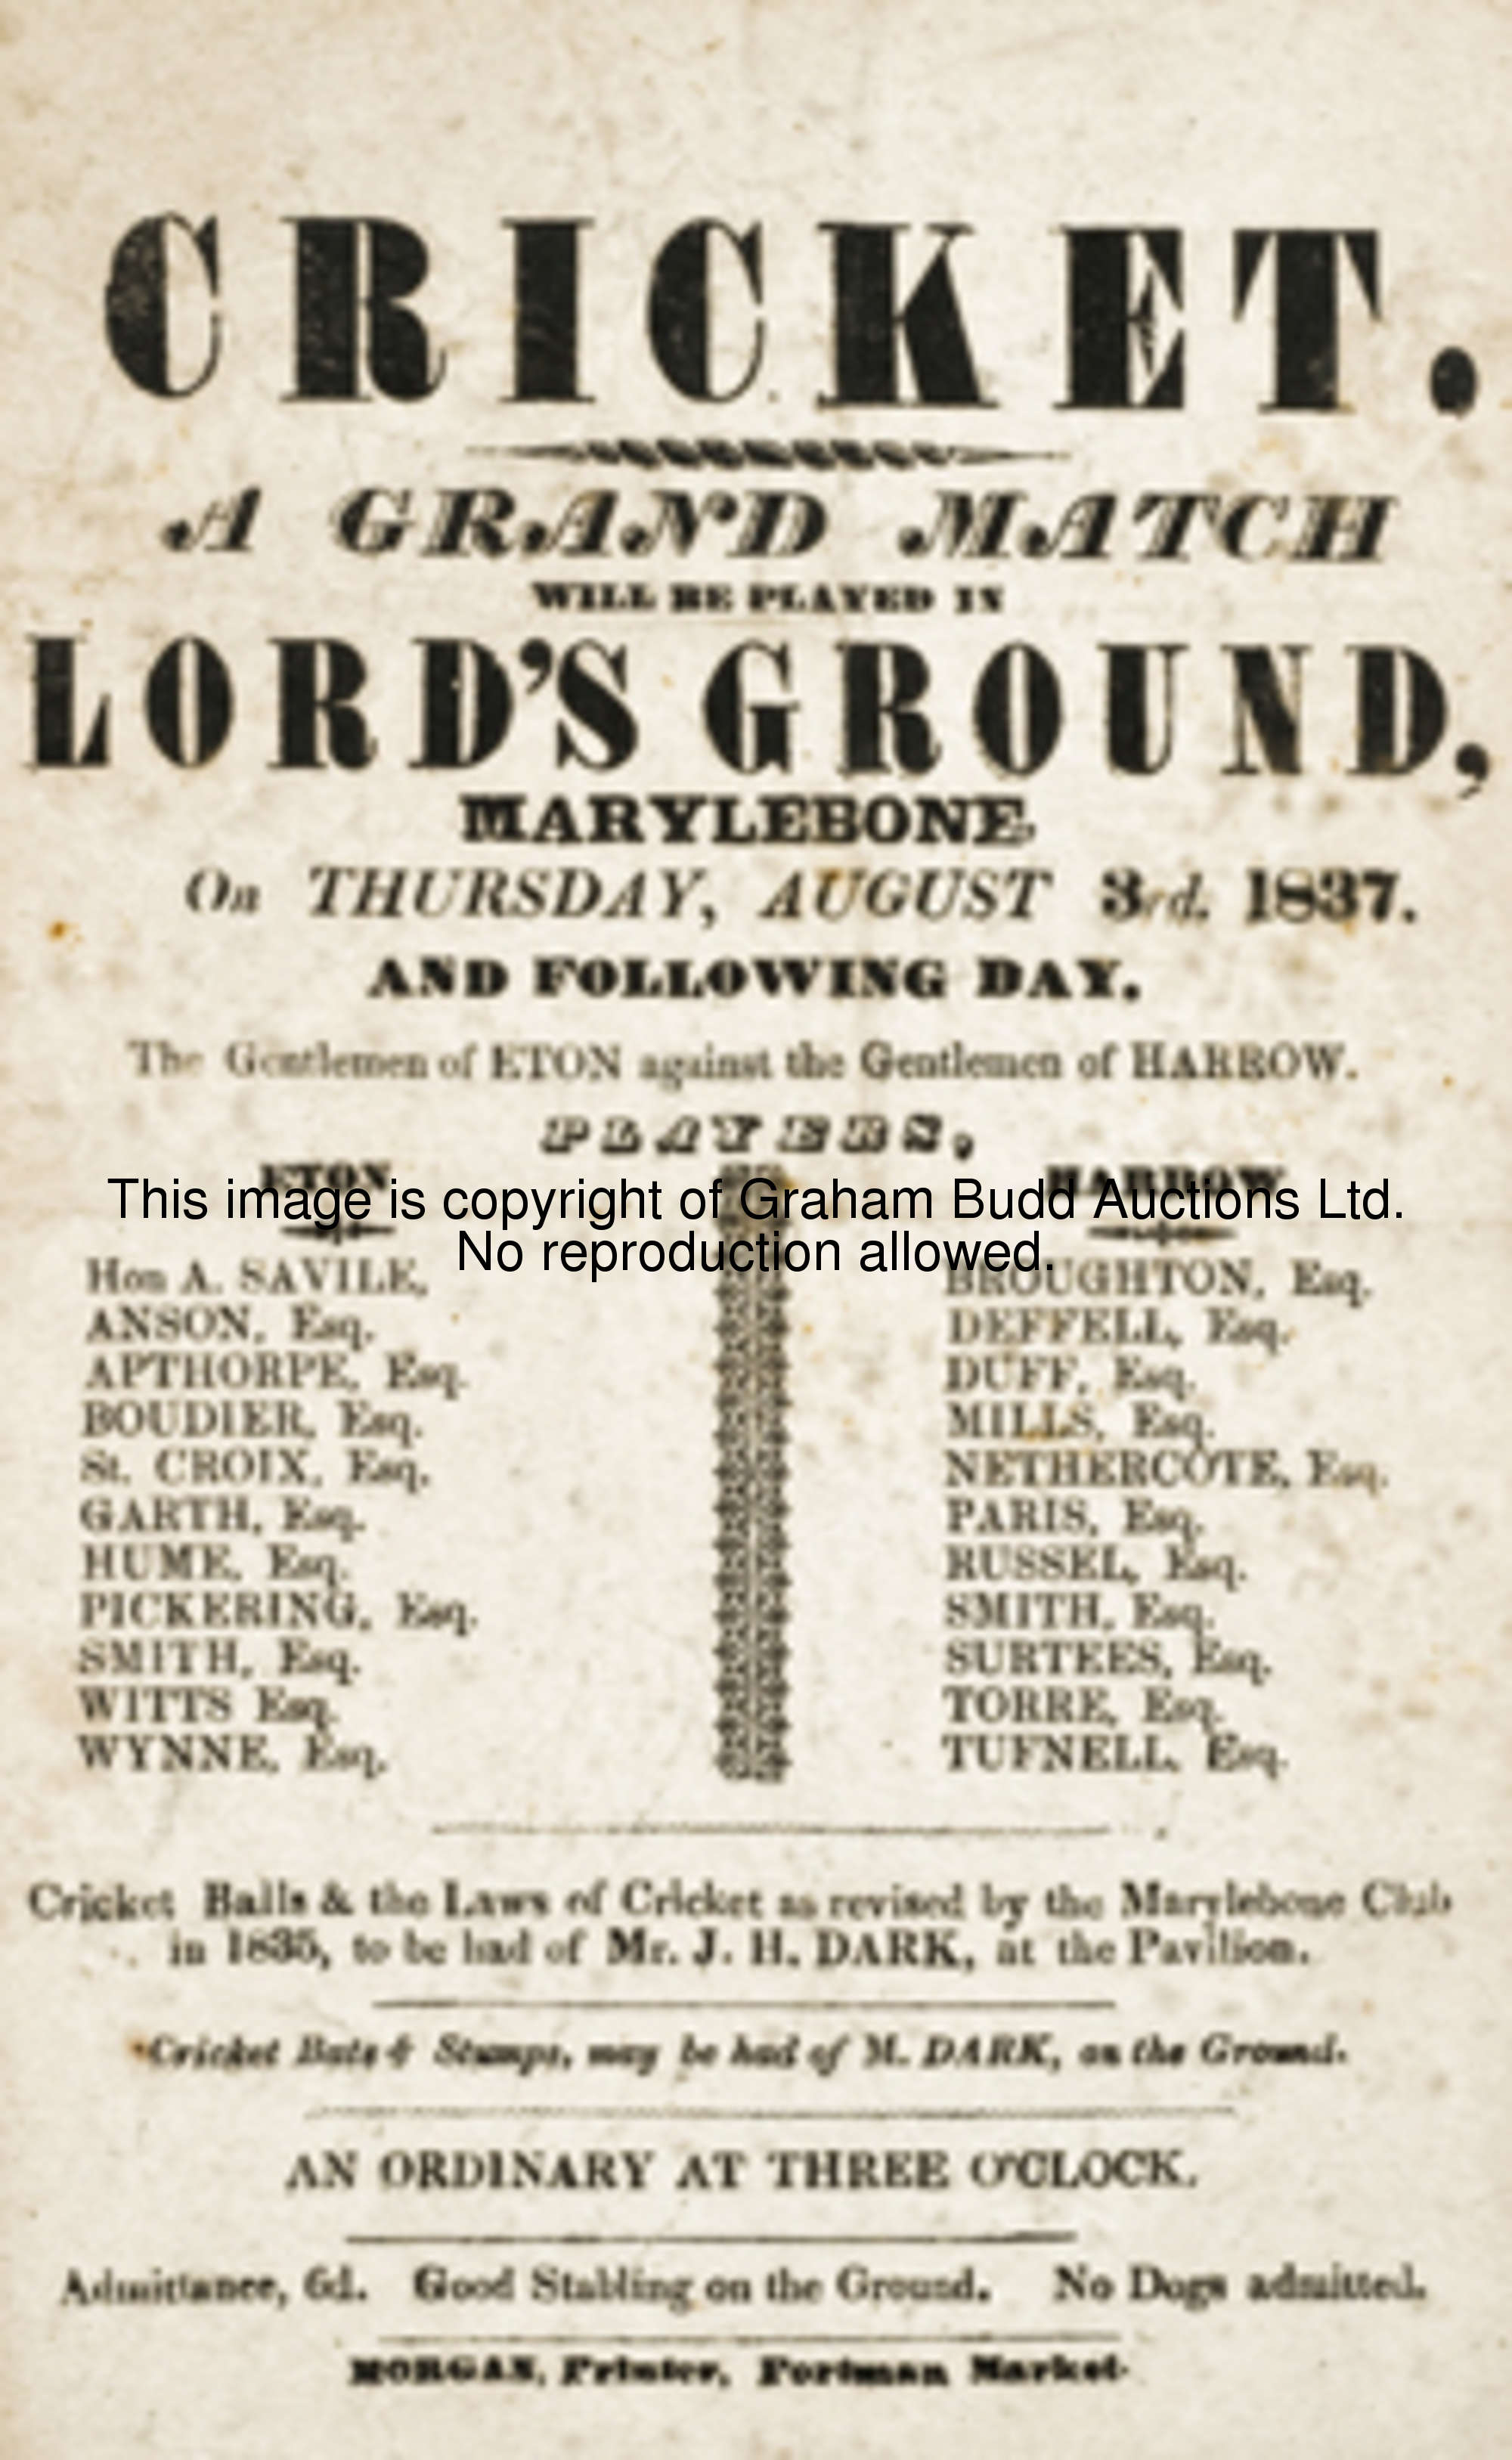 A handbill for the Eton & Harrow cricket match at Lord's 3rd & 4th August 1837, printed by Morgan of...